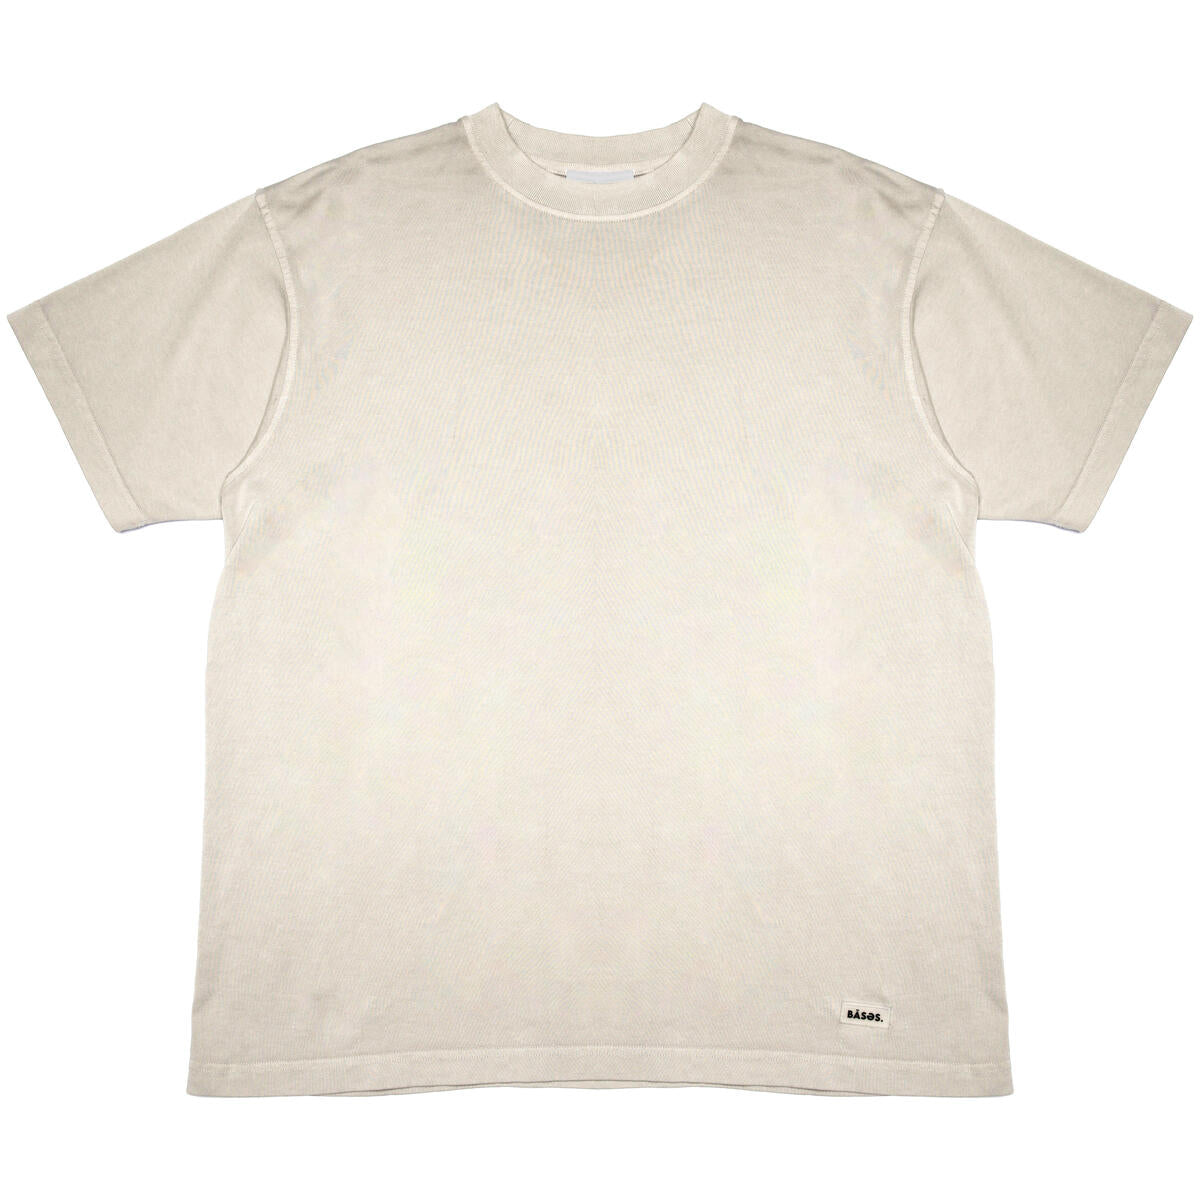 BASES - Vintage Dyed Tee - OFF White